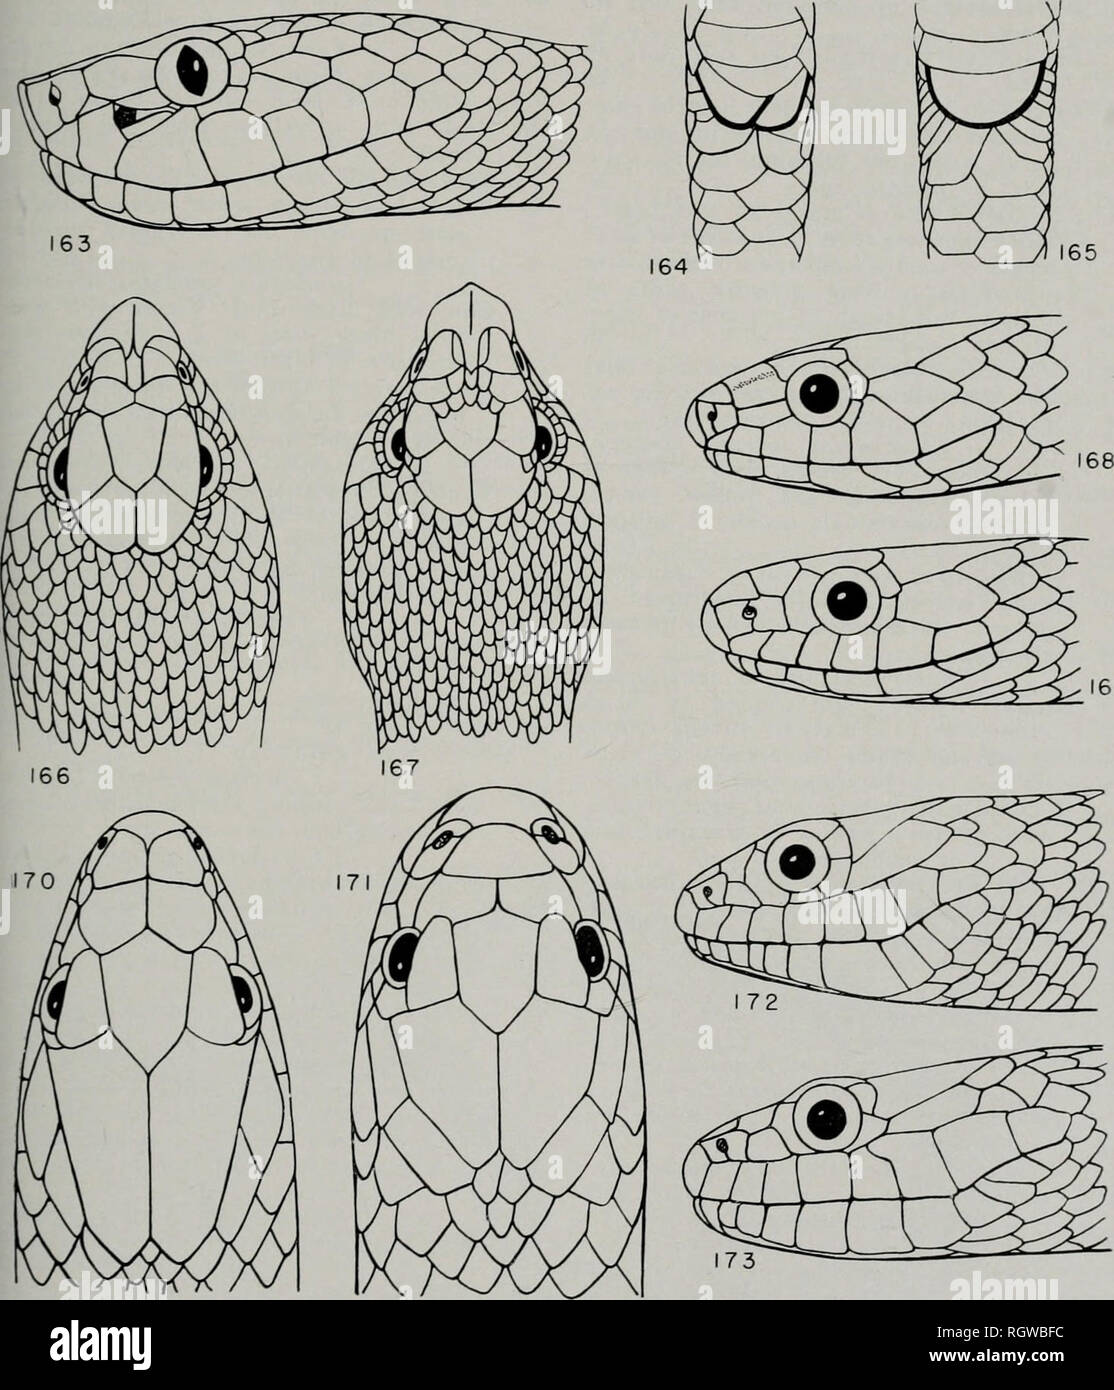 . Bulletin. Natural history; Natural history. November, 1961 Smith: Amphibians and Reptiles of Illinois 175 26. Suboculars separating eye from labials; 28. venter predominantly dark, with light spots, fig. 172 Matrix cyclopion cyclopion No suboculars, fig. 173; venter yellow, with dark spots Matrix rhombifera rhombifera 27. Venter unmarked, yellow or red 28 29. Venter marked with brown or black spots or blotches 29 Ventral color red or red-orange, not touch- ing first scale rows; dorsum black Matrix erythrogaster neglecta Ventral color yellow or orange-yellow, en- croaching on lowermost latera Stock Photo